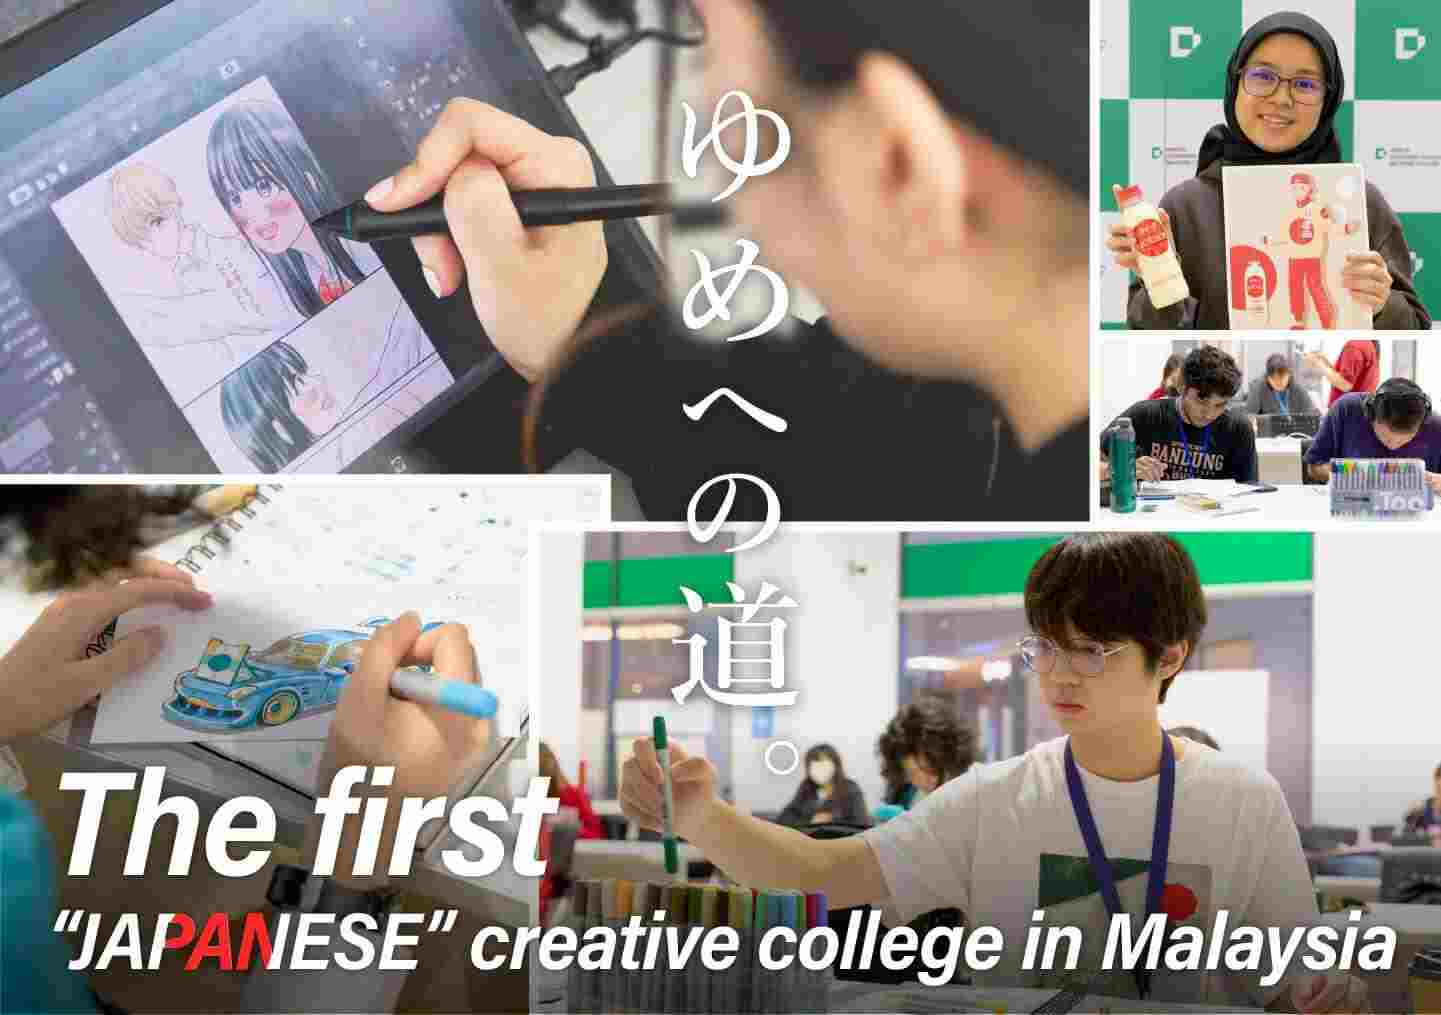 Best illustration course by Japanese Art University in Malaysia is NDS (illustration)